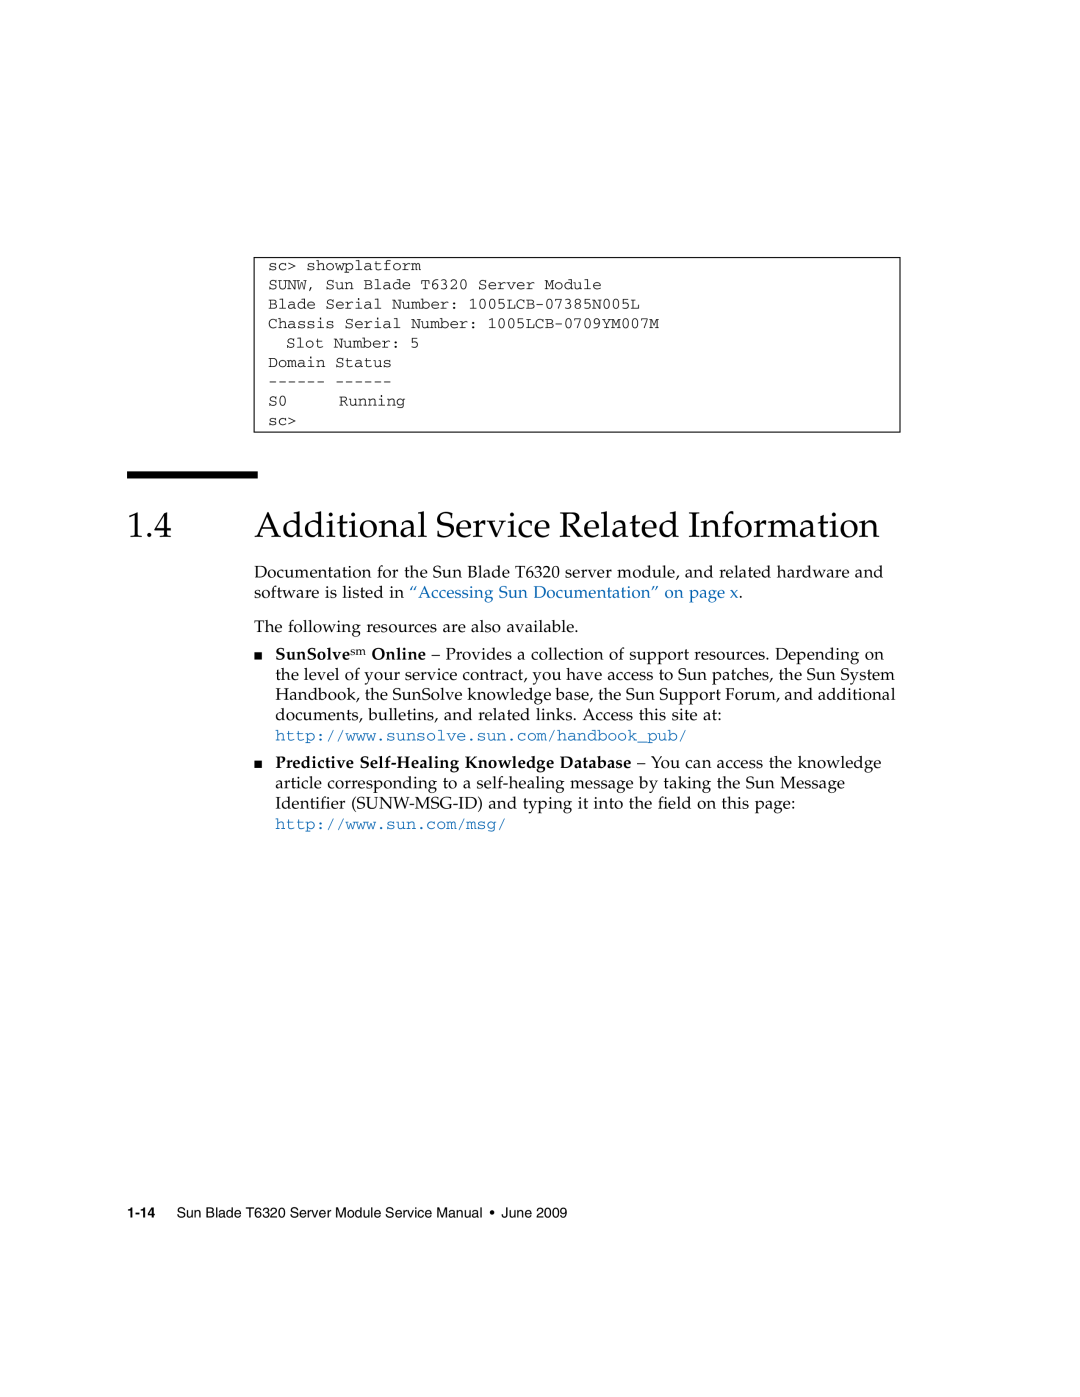 Sun Microsystems T6320 Additional Service Related Information, sc showplatform, Slot Number 5 Domain Status, S0 Running sc 